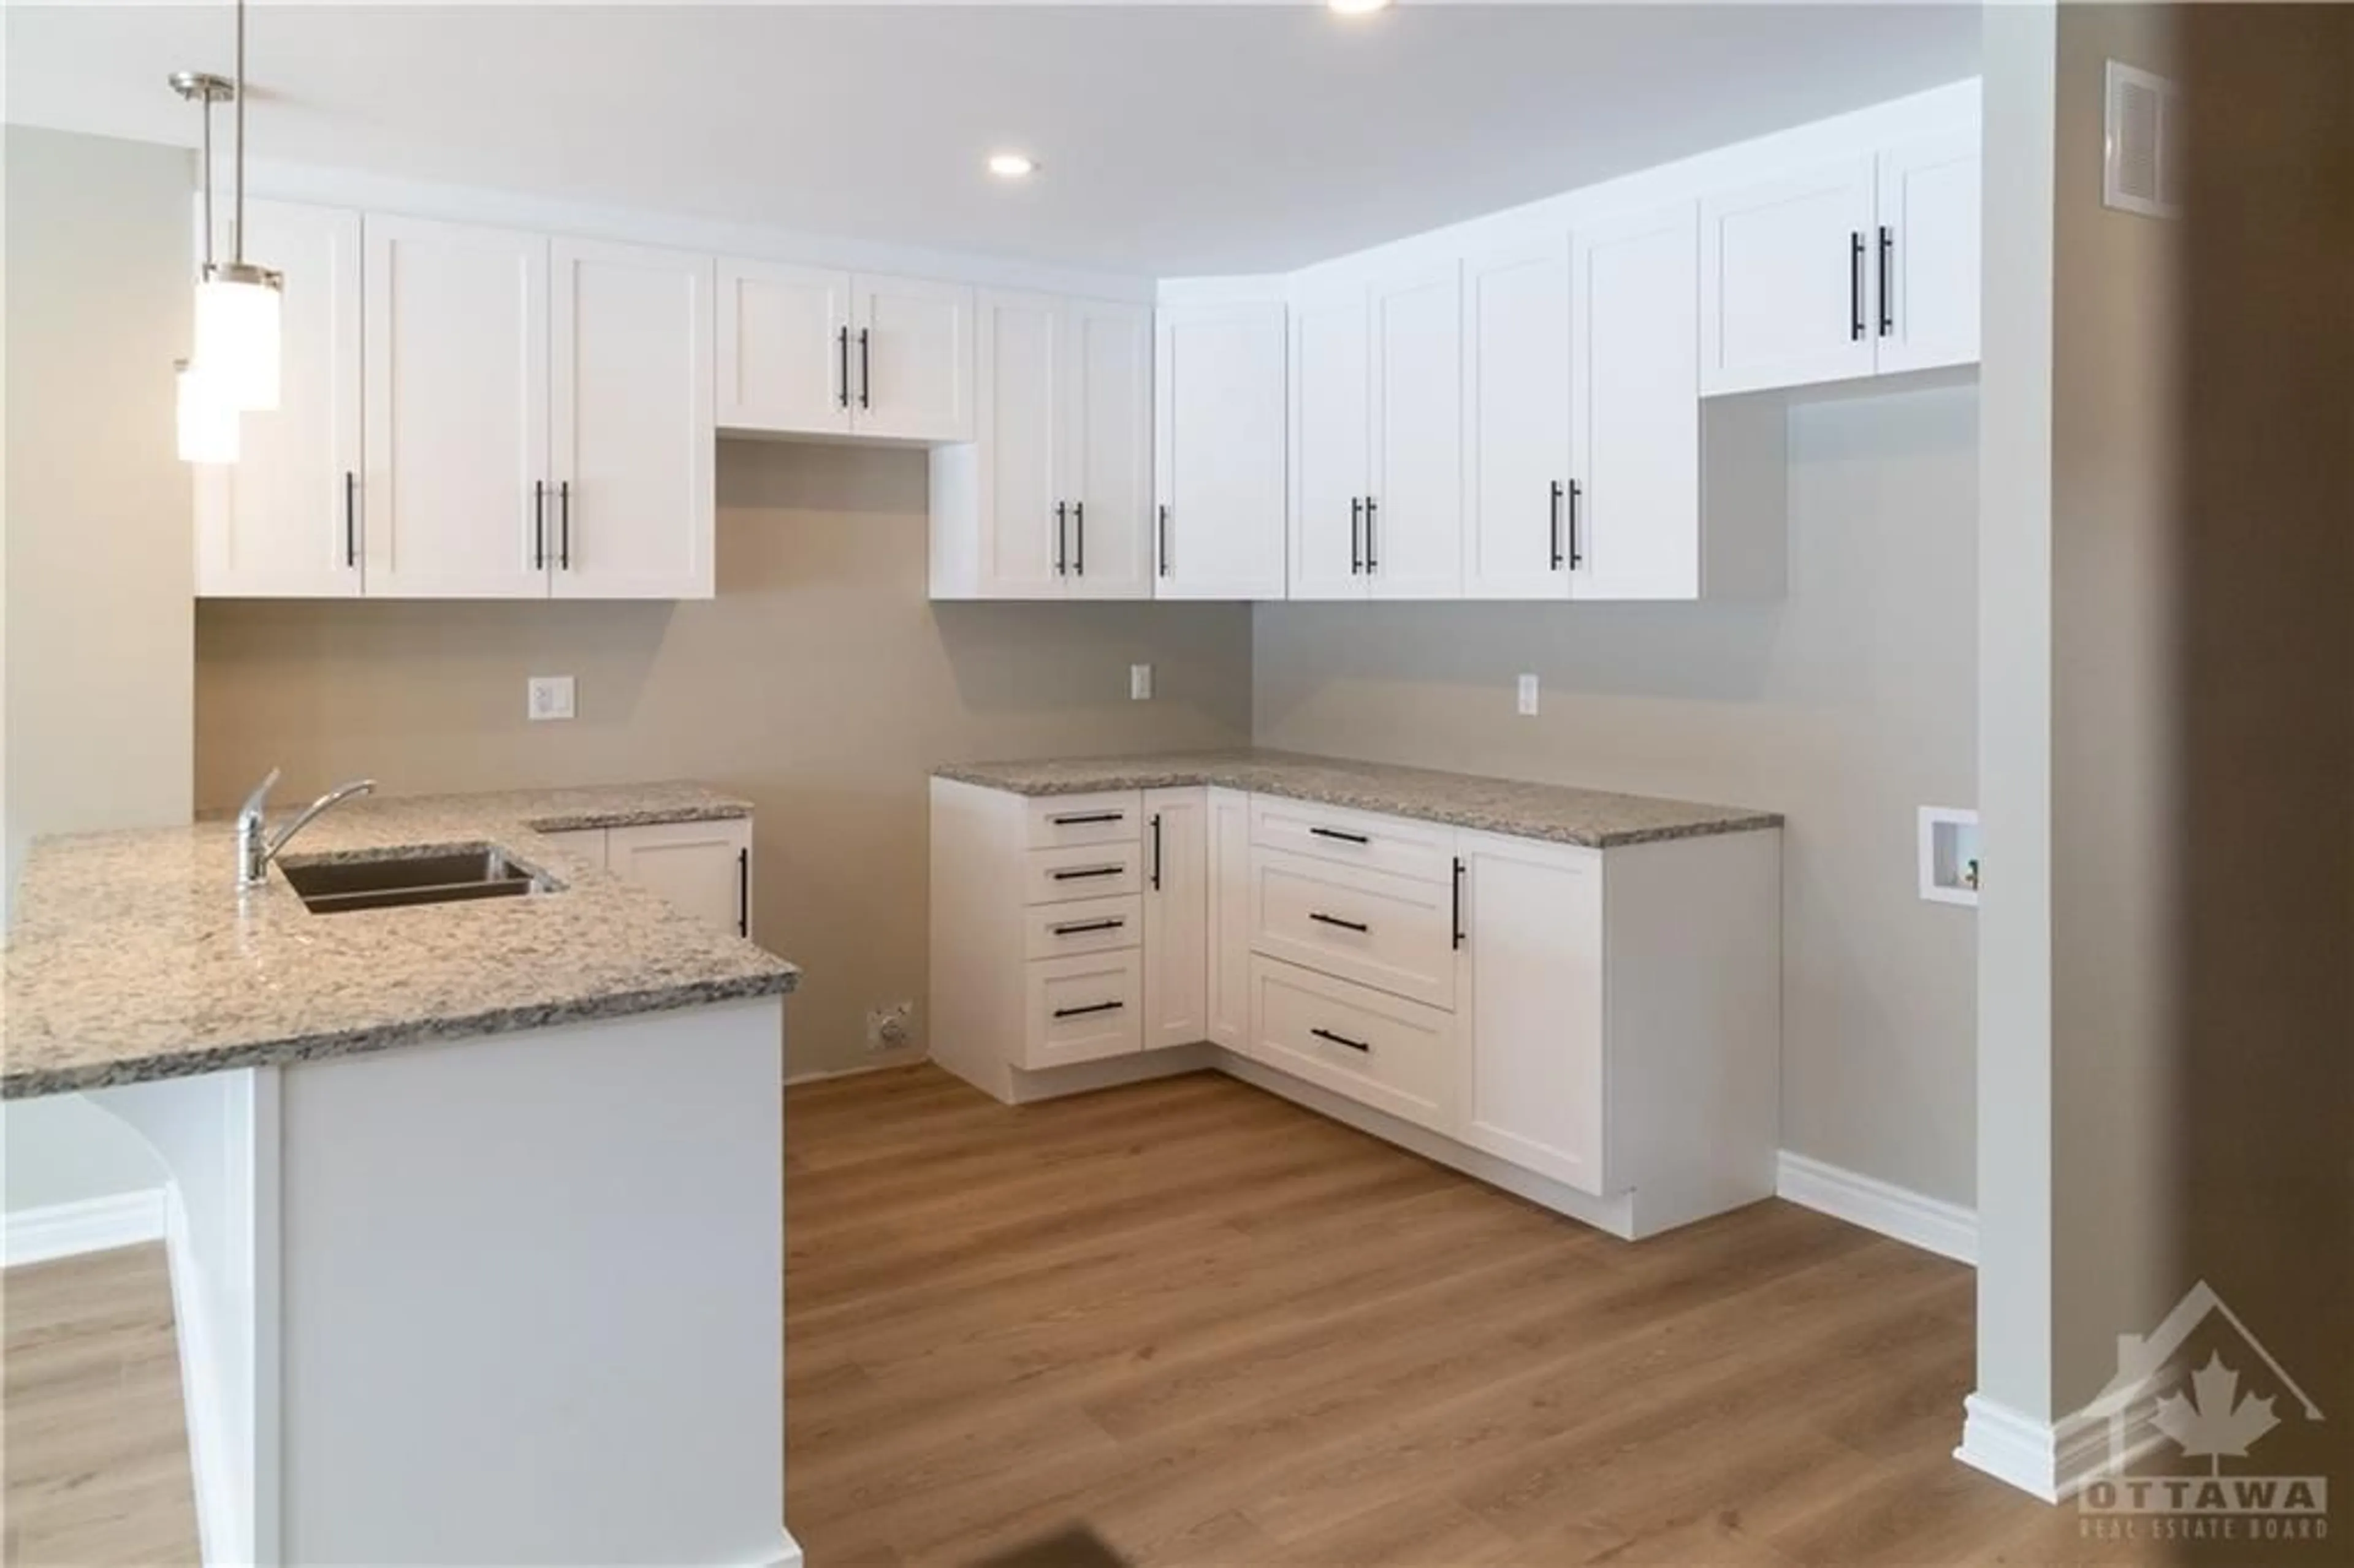 Contemporary kitchen for 112 DOWDALL Cir, Carleton Place Ontario K7C 0S4